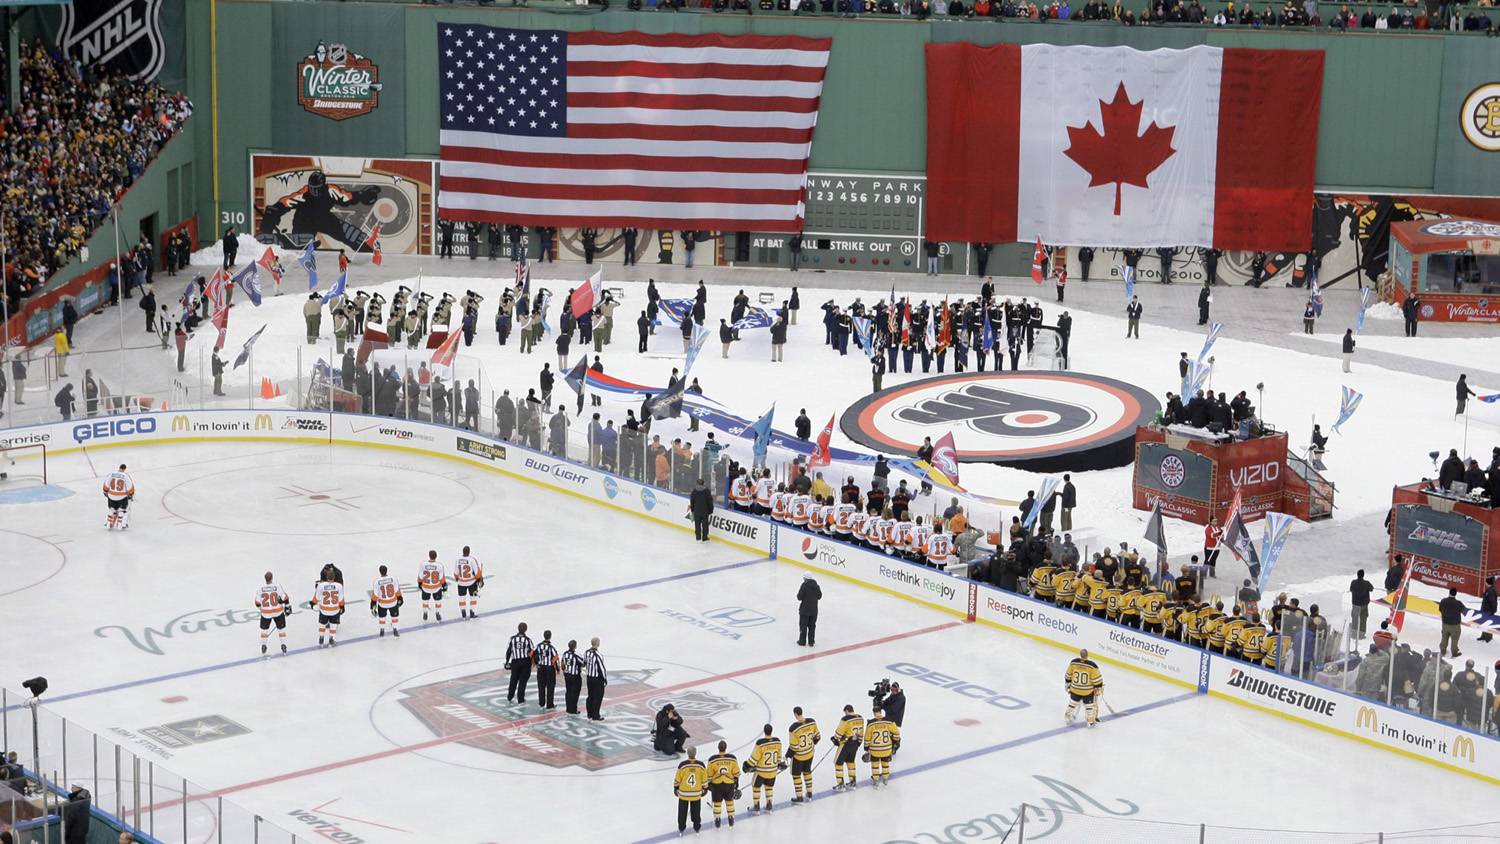 A Beantown Winter Classic - The Globe and Mail